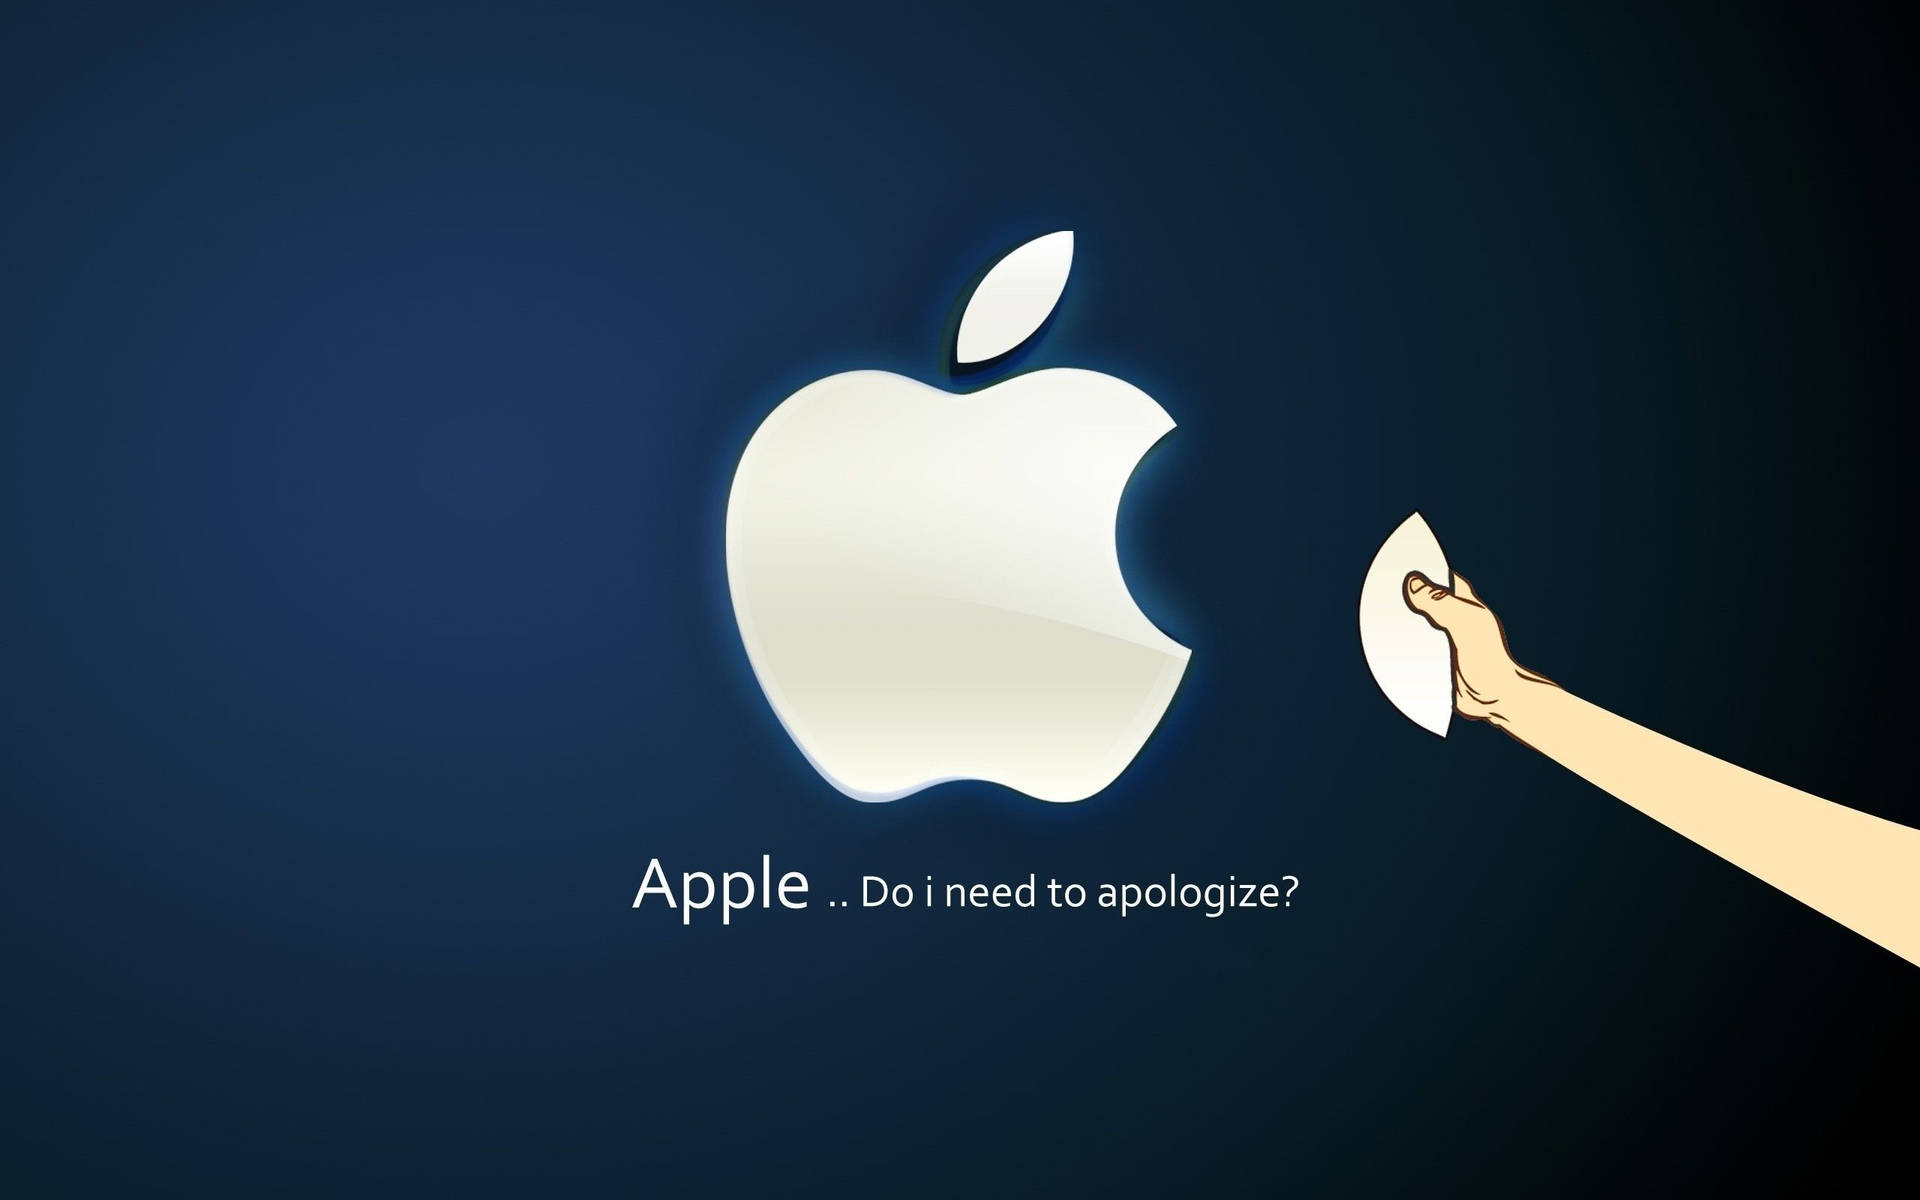 Apple Switches to a More Fun Brand Identity! Wallpaper